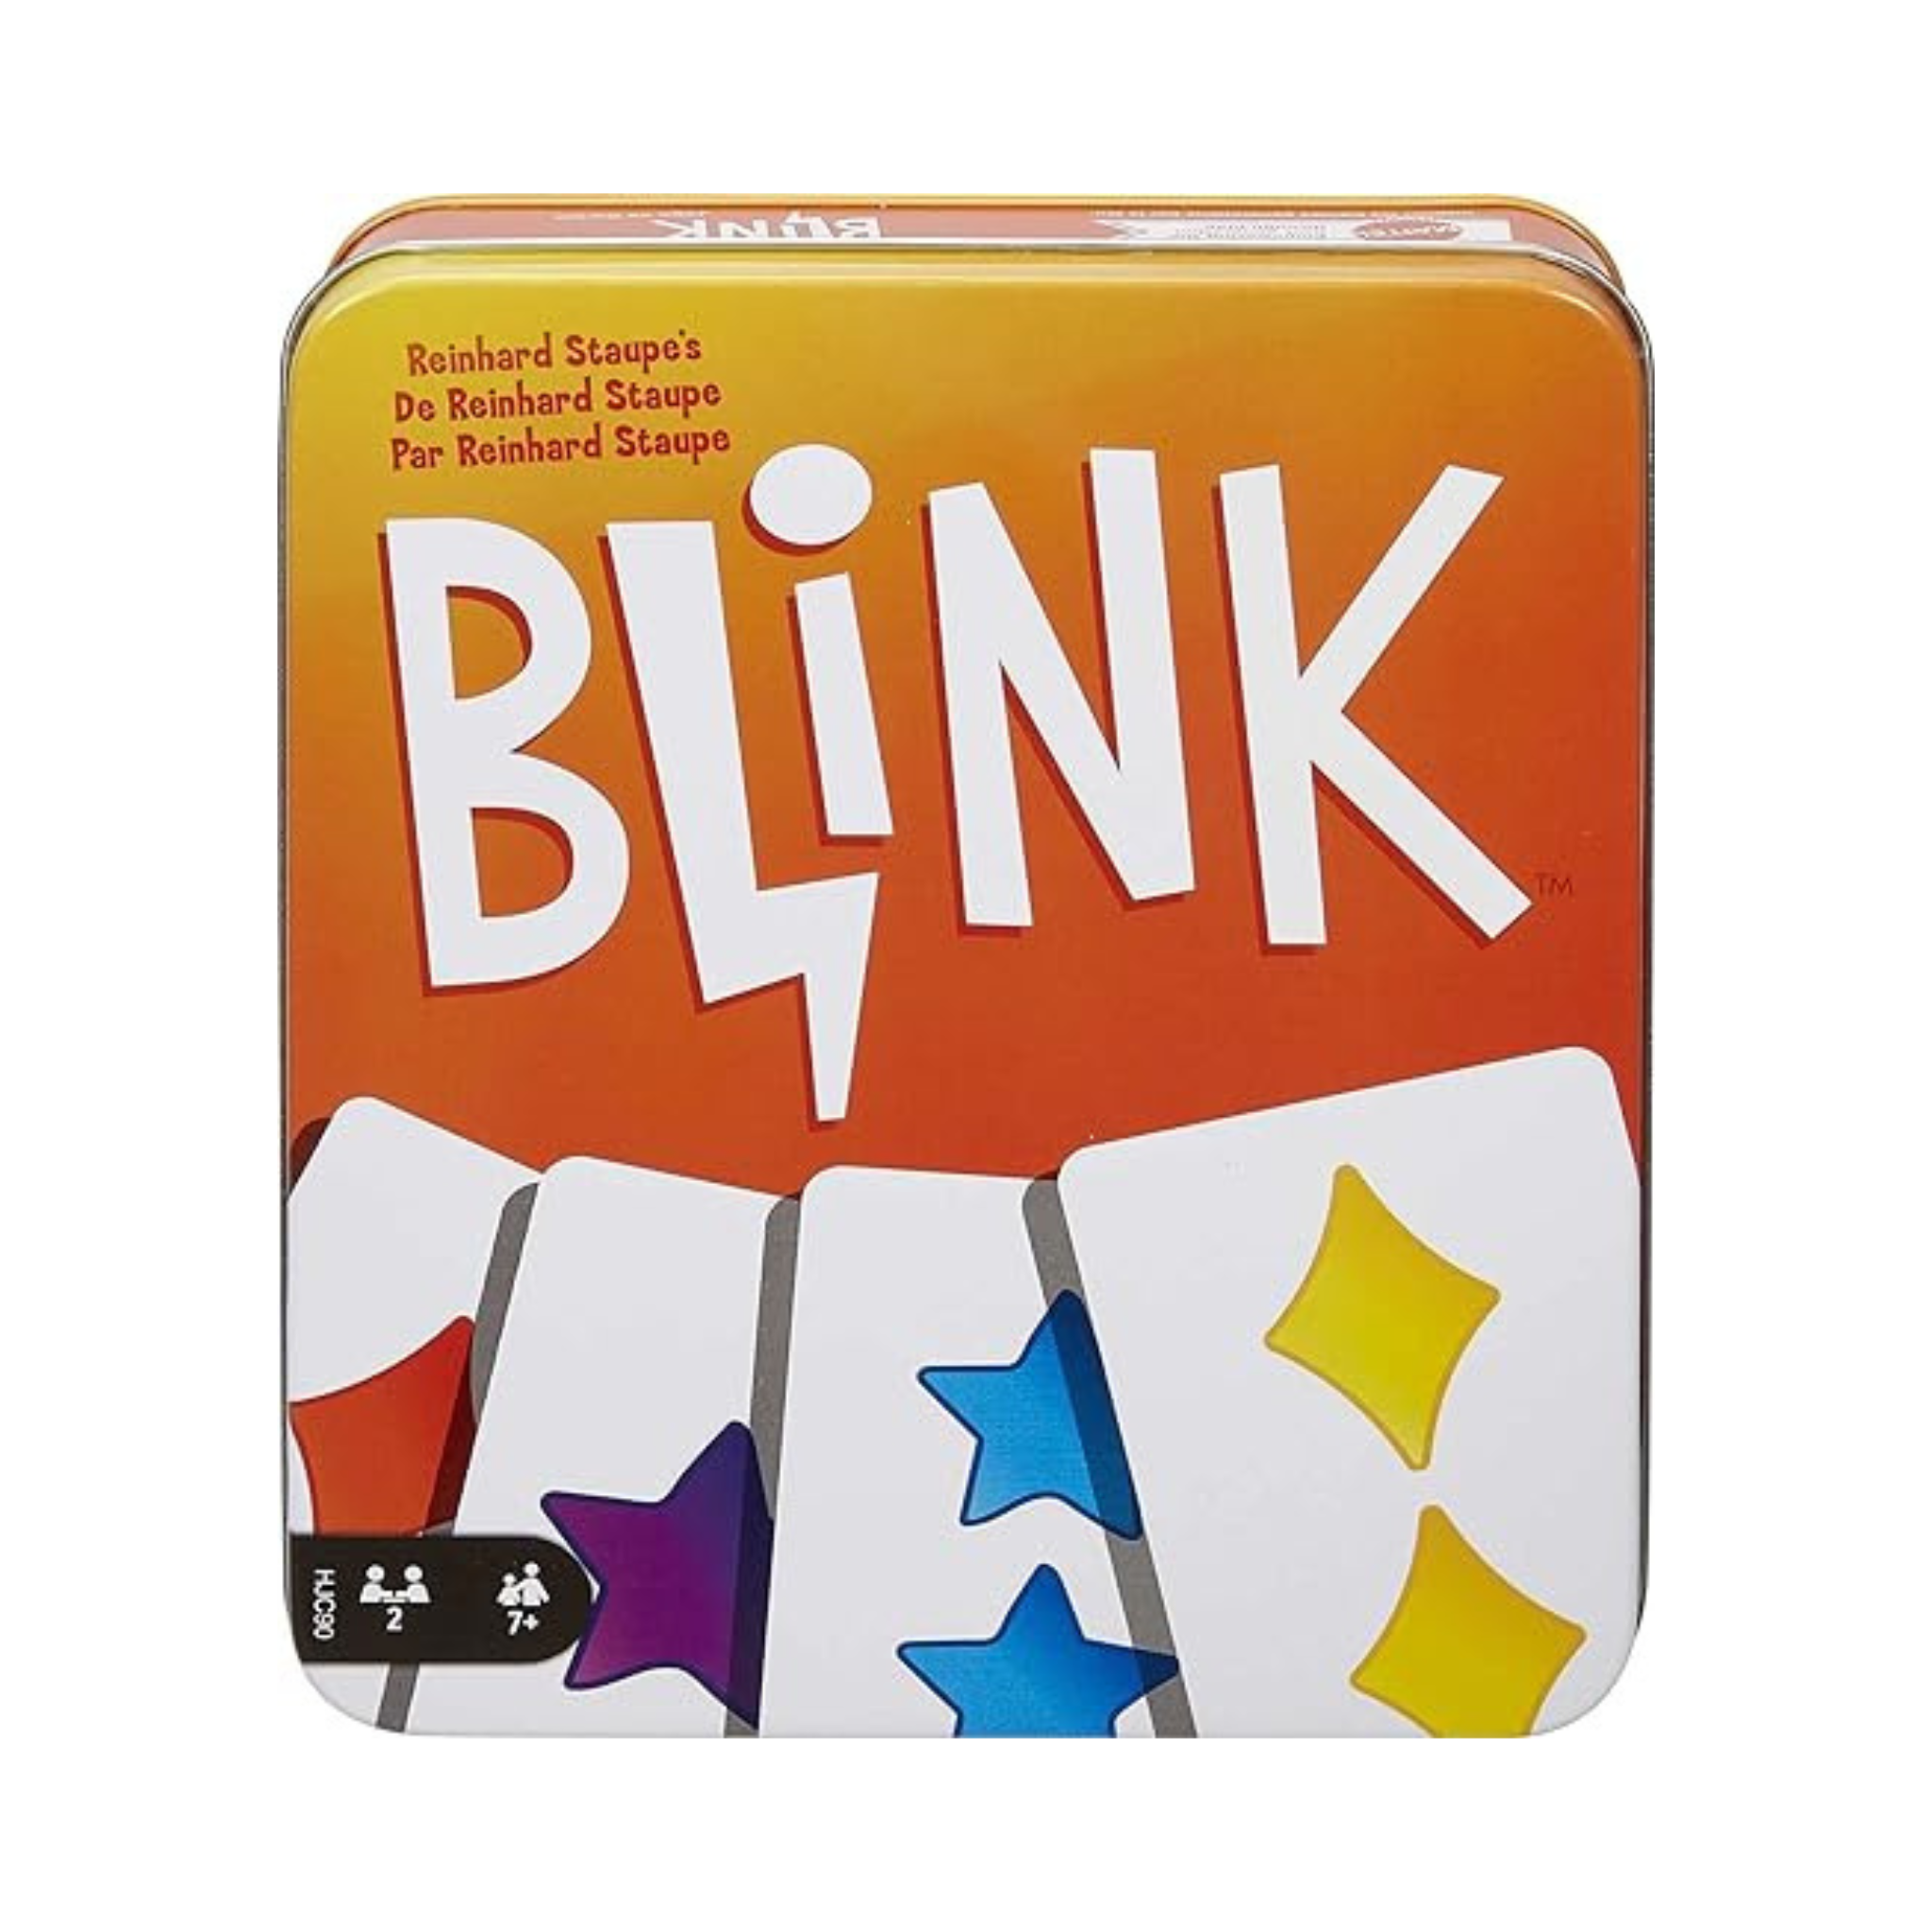 Mattel Games Blink Card Game in a Collectible Storage Tin